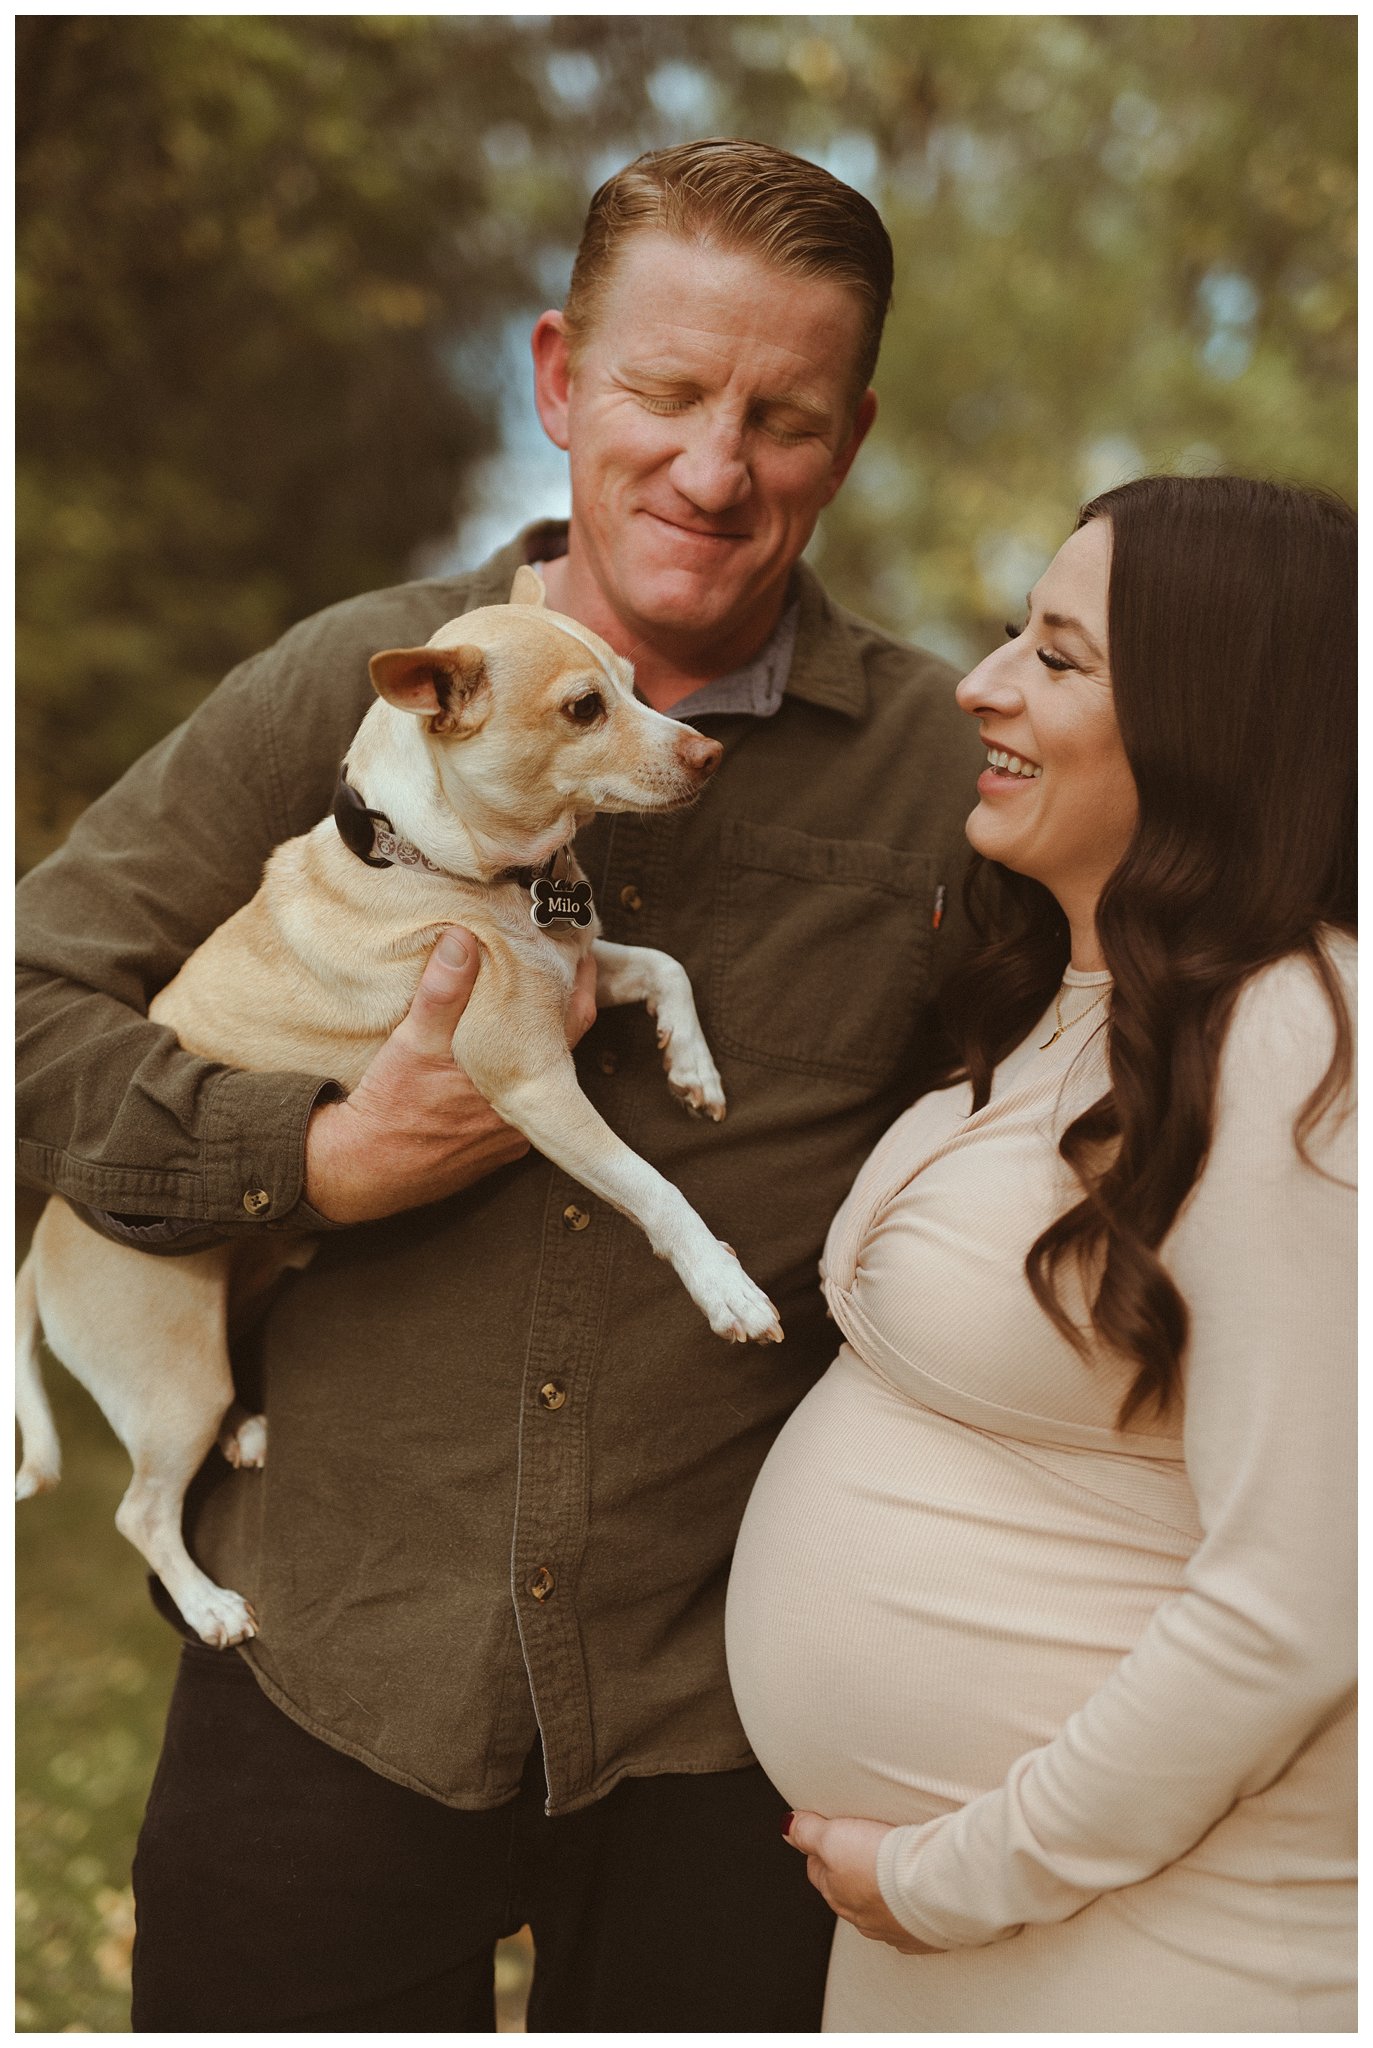 Ashley &amp; Mike Maternity Session at Boise River Greenbelt by Treasure Valley Portrait Photographer, Kamra Fuller Photography